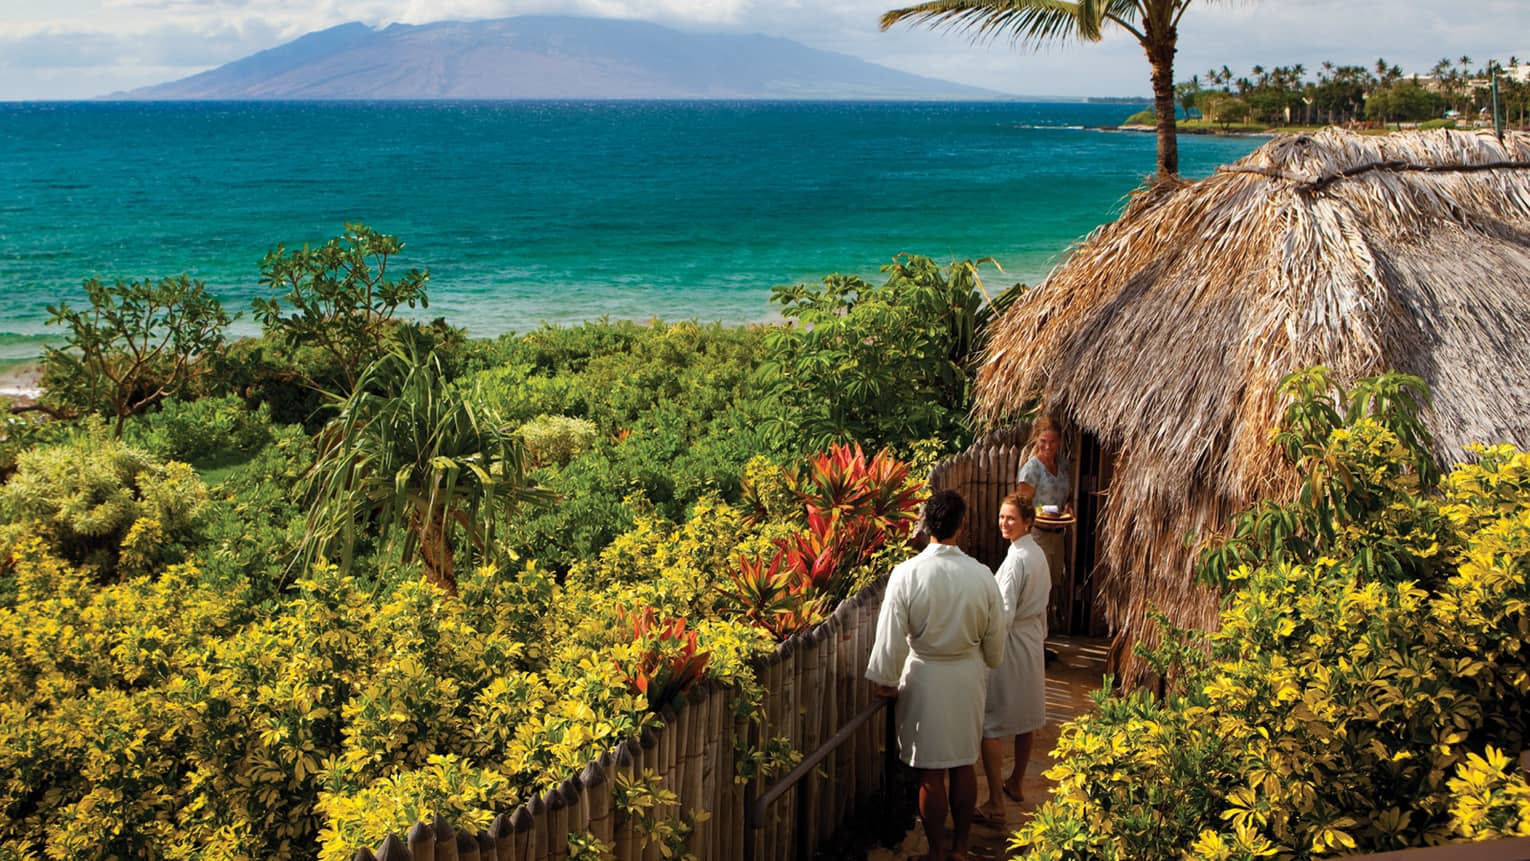 Couple in white bathrobes follow spa attendant into thatched-roof hut on path looking out at ocean